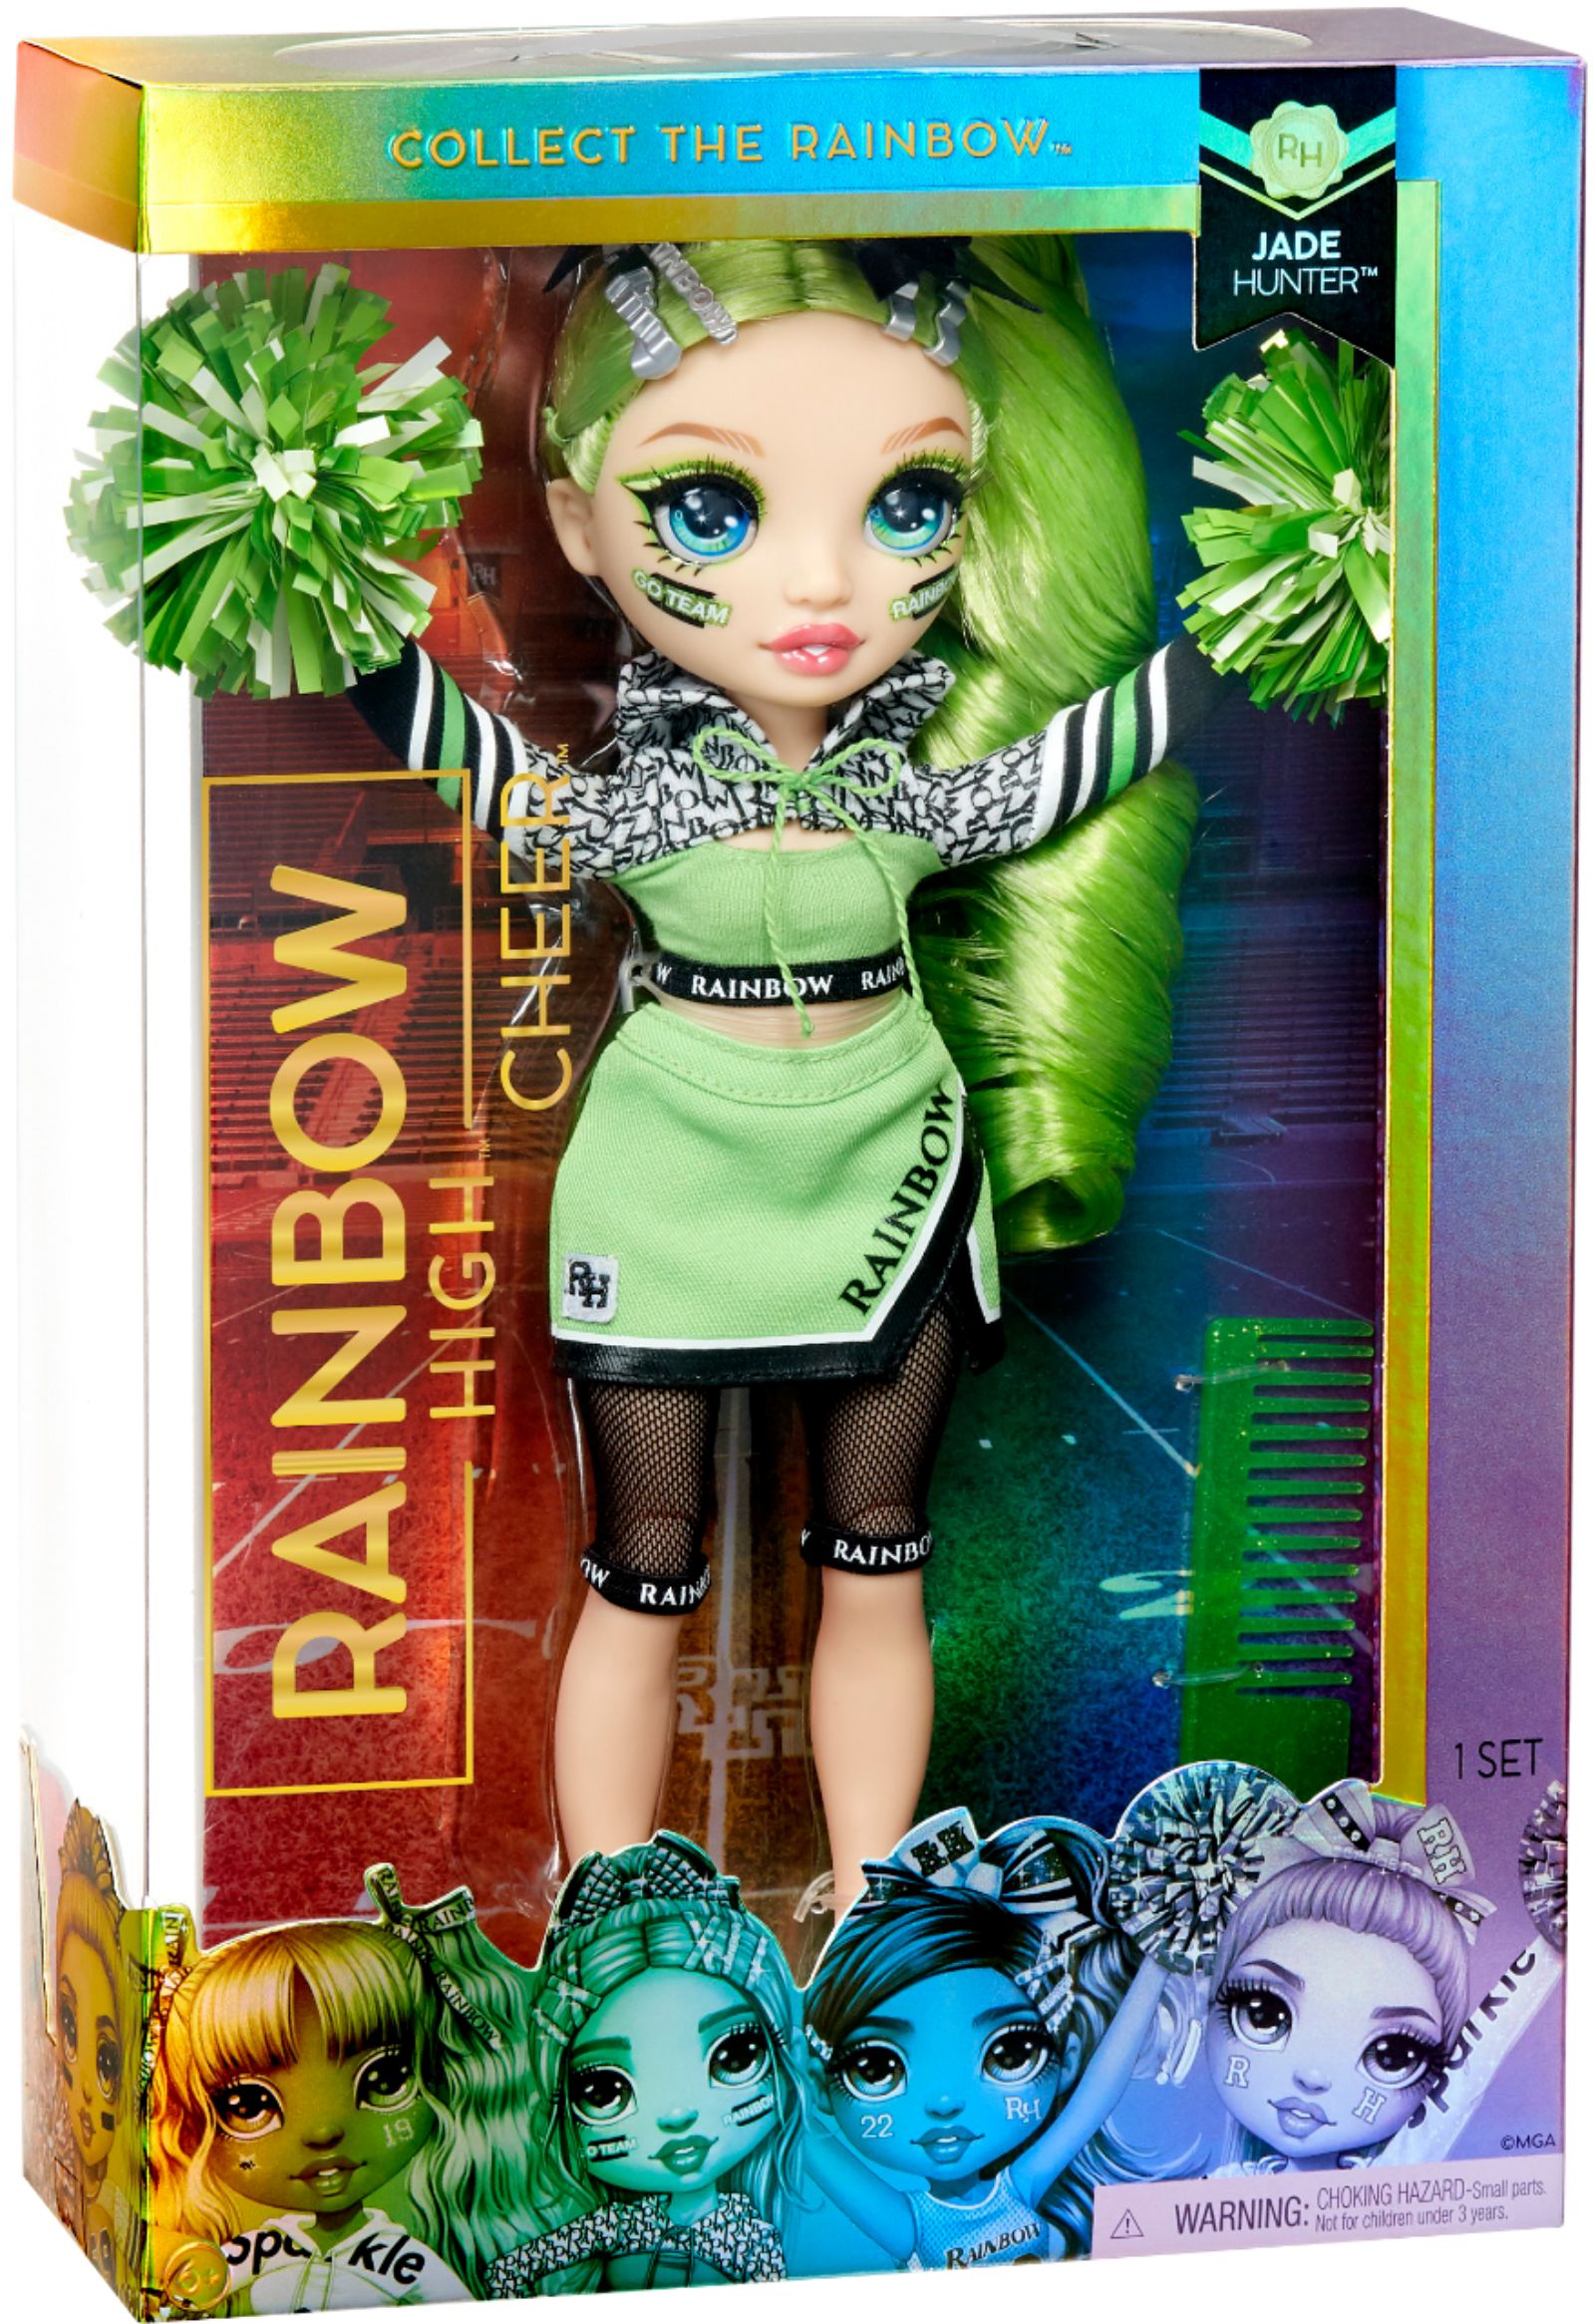 Rainbow High Cheer Jade Hunter – Green Cheerleader Fashion Doll with 2 Pom  Poms and Doll Accessories, Great Gift for Kids 6-12 Years Old